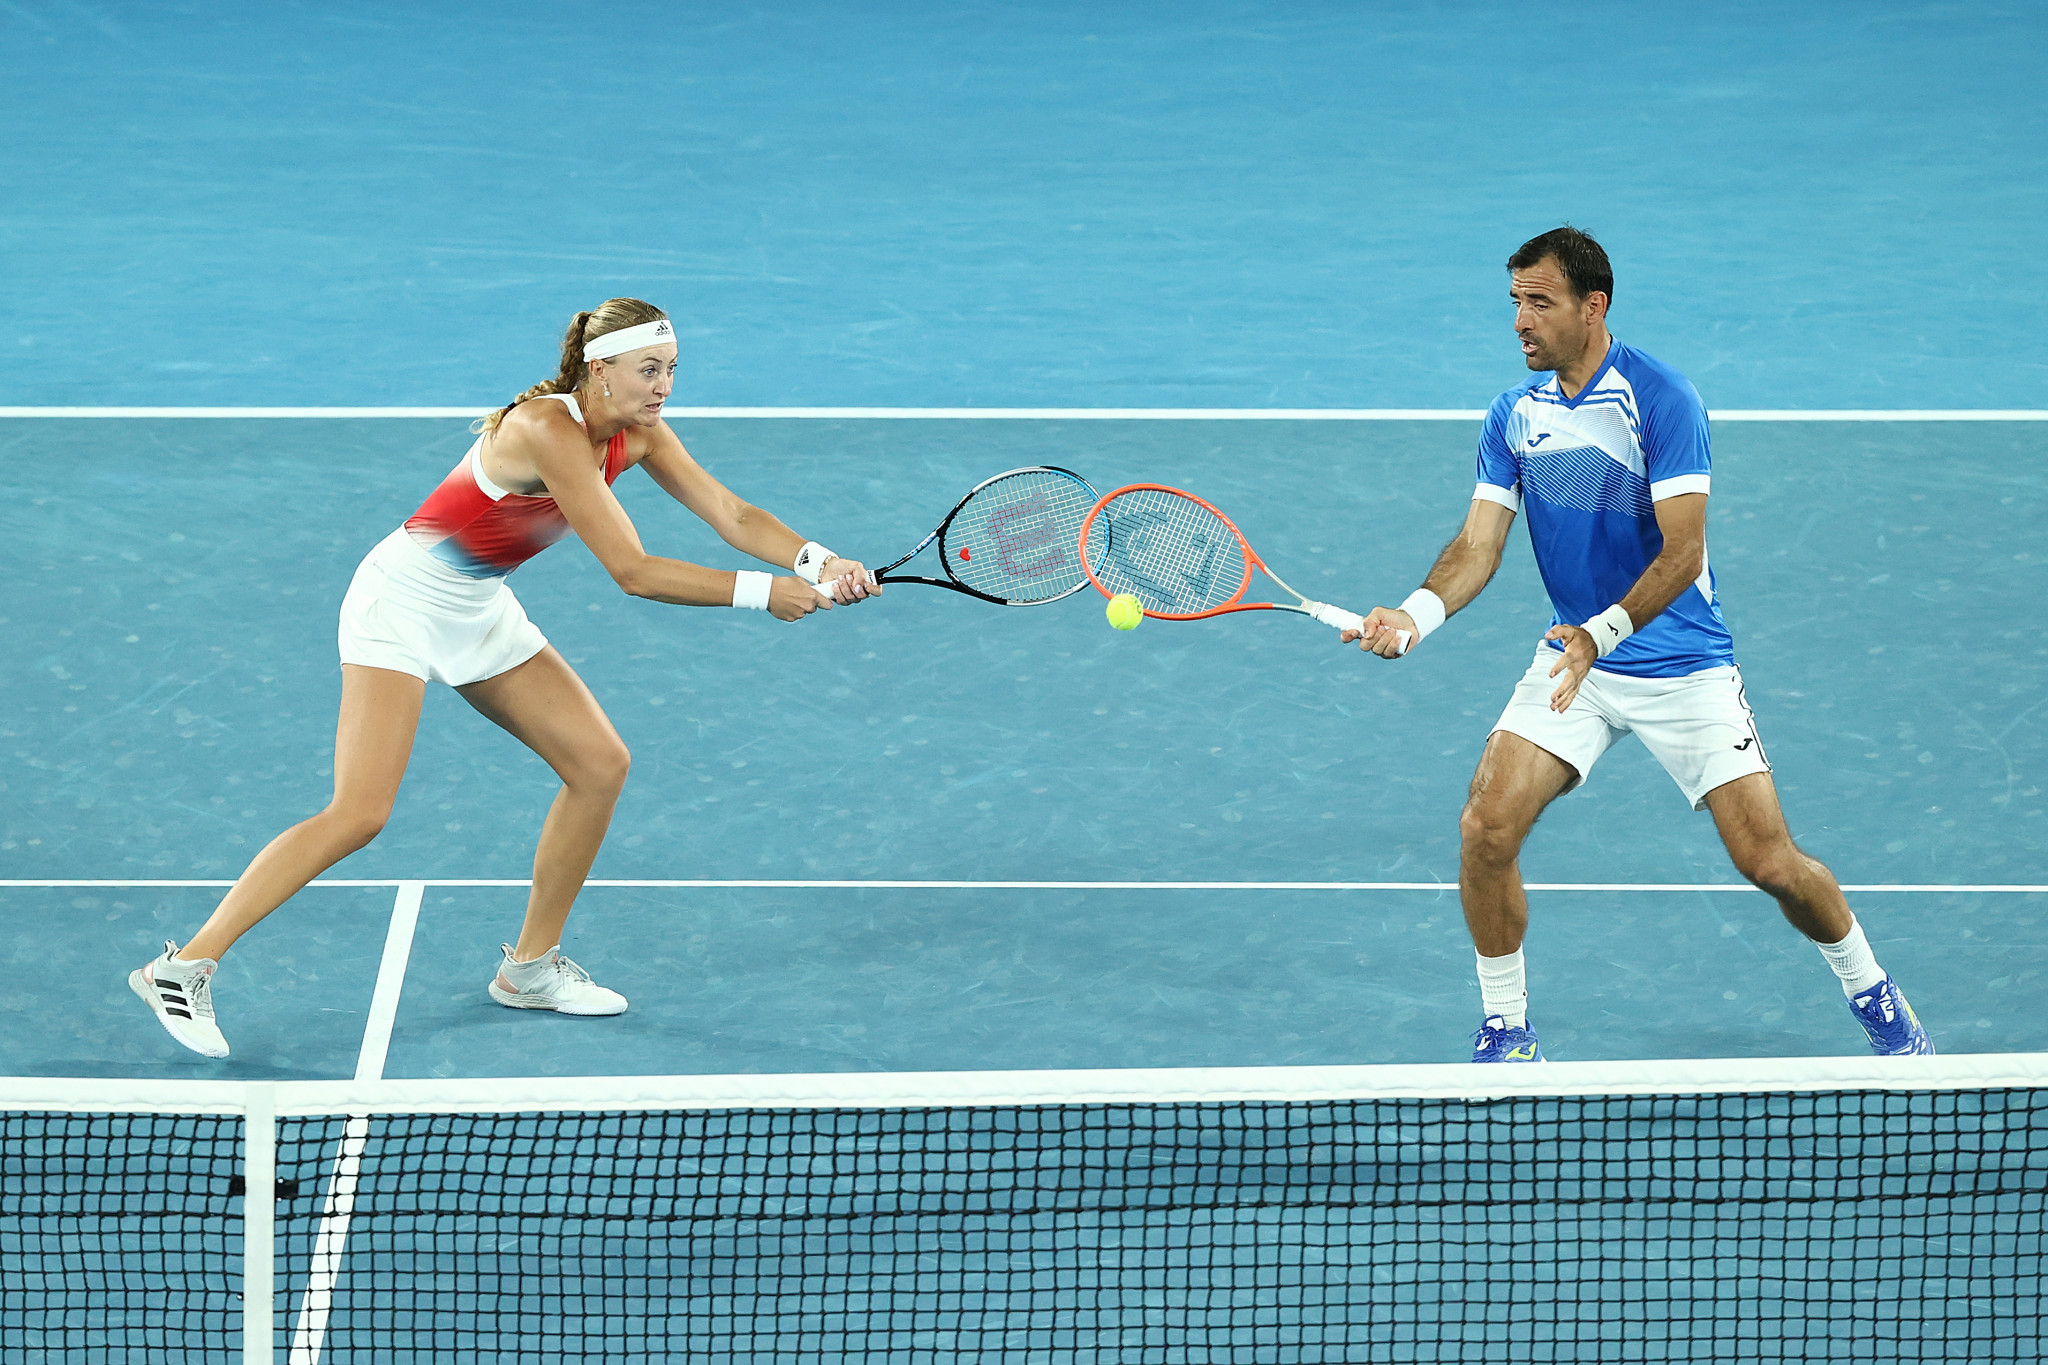 Kristina Mladenovic and Ivan Dodig won the mixed doubles final on day 12 in Melbourne ©Getty Images